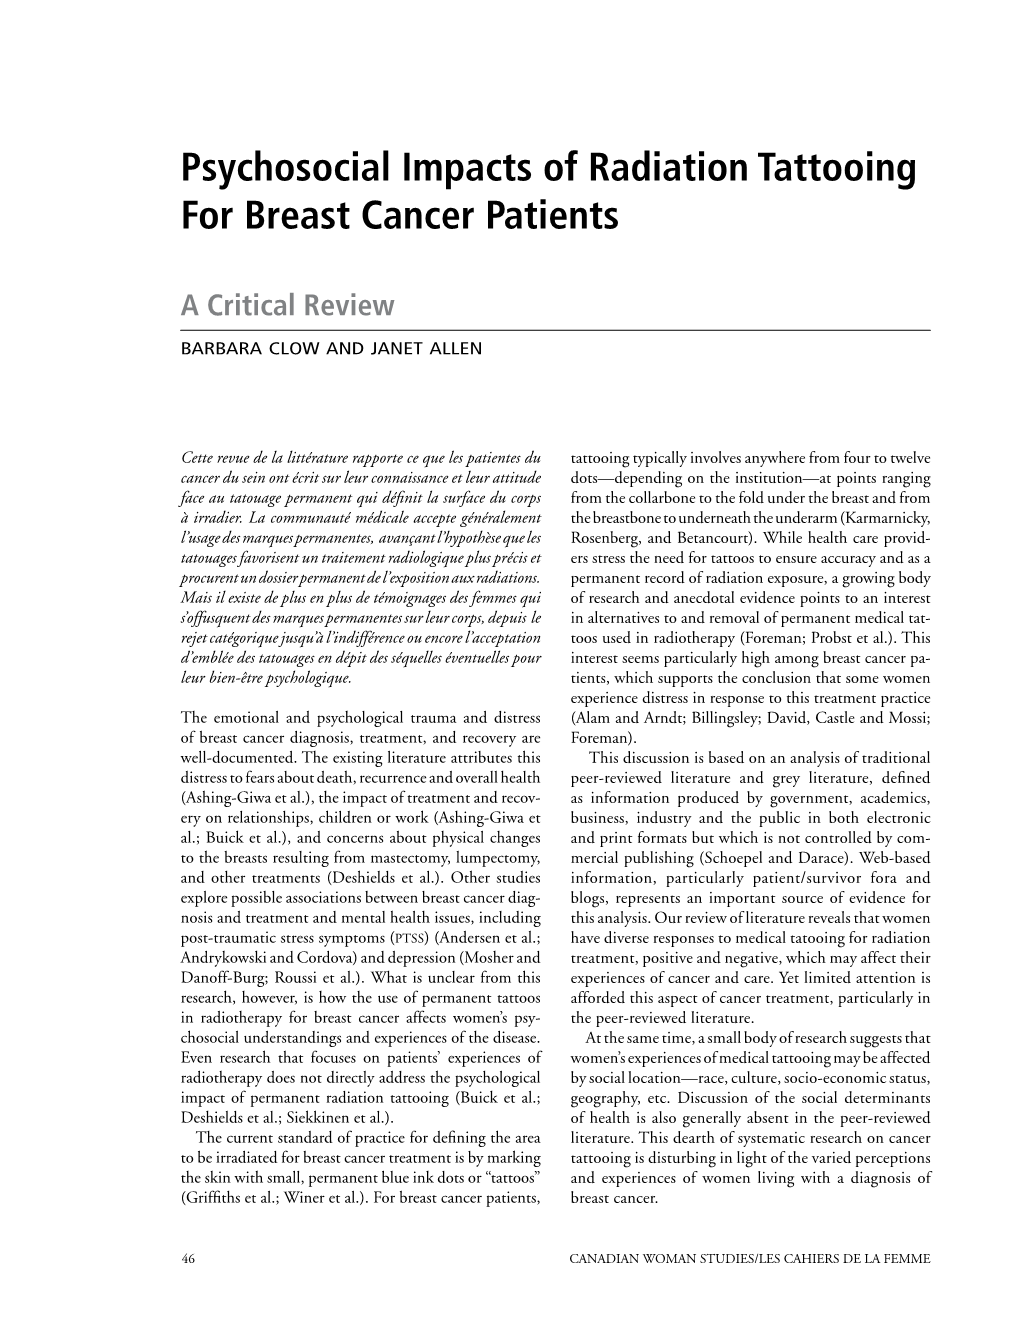 Psychosocial Impacts of Radiation Tattooing for Breast Cancer Patients